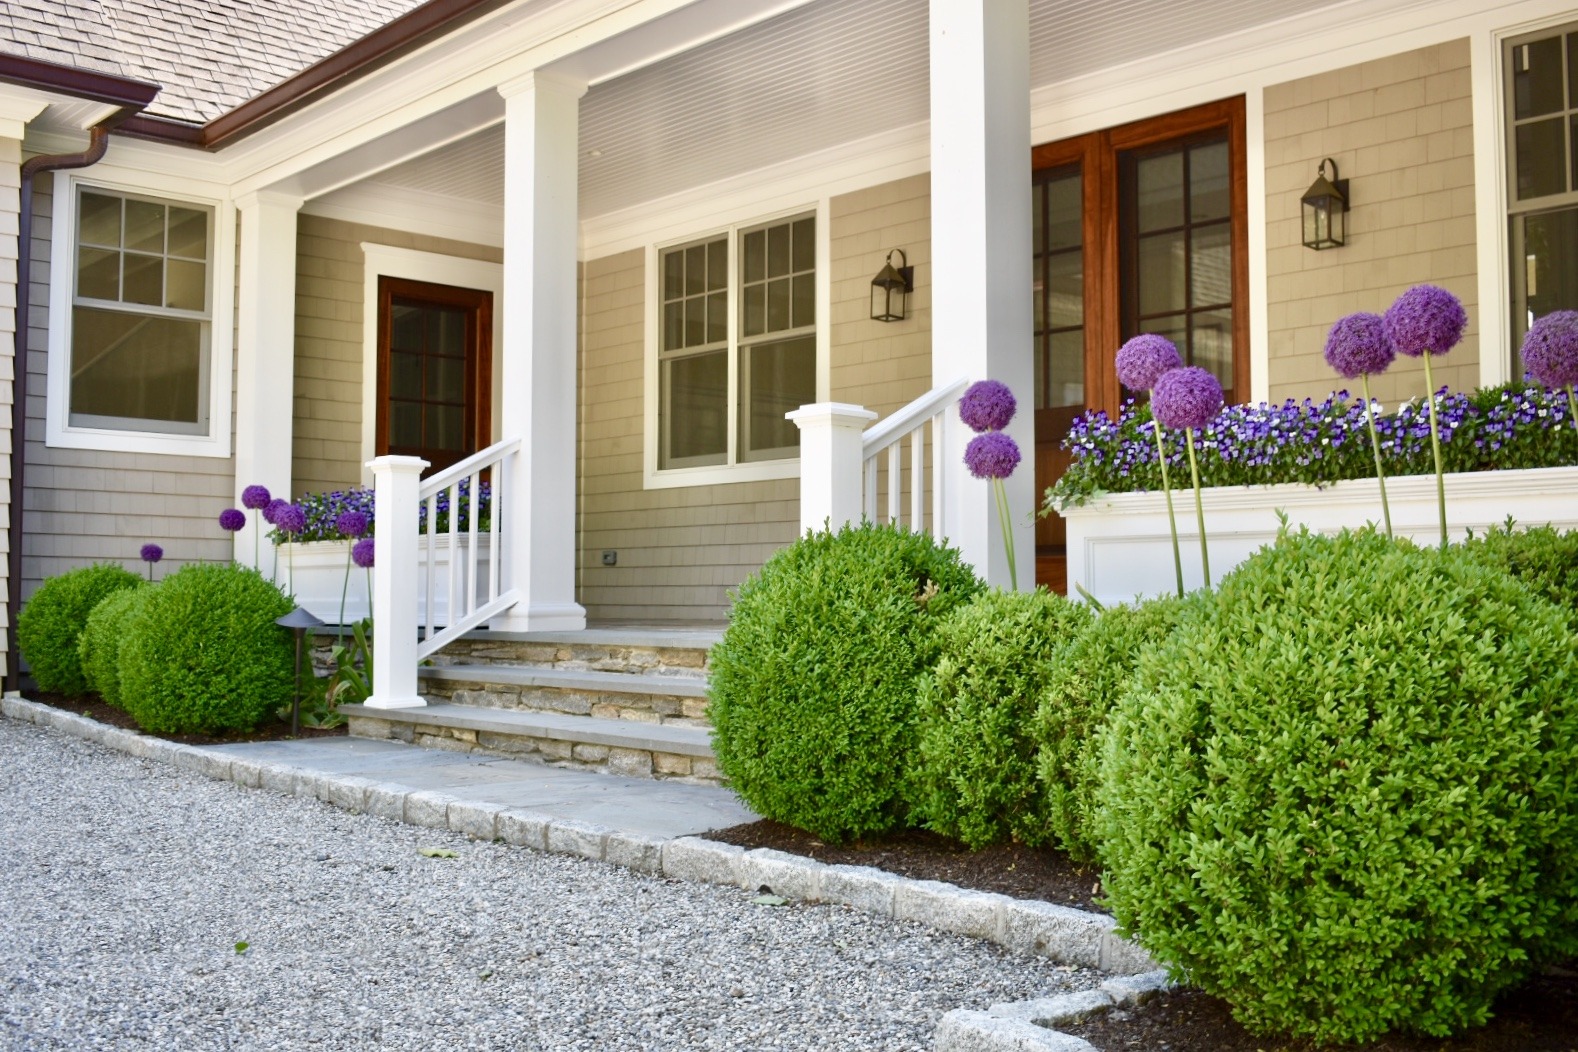 A charming home entrance with a covered porch, white columns, green bushes, purple flowers, and a gravel path under a clear blue sky.